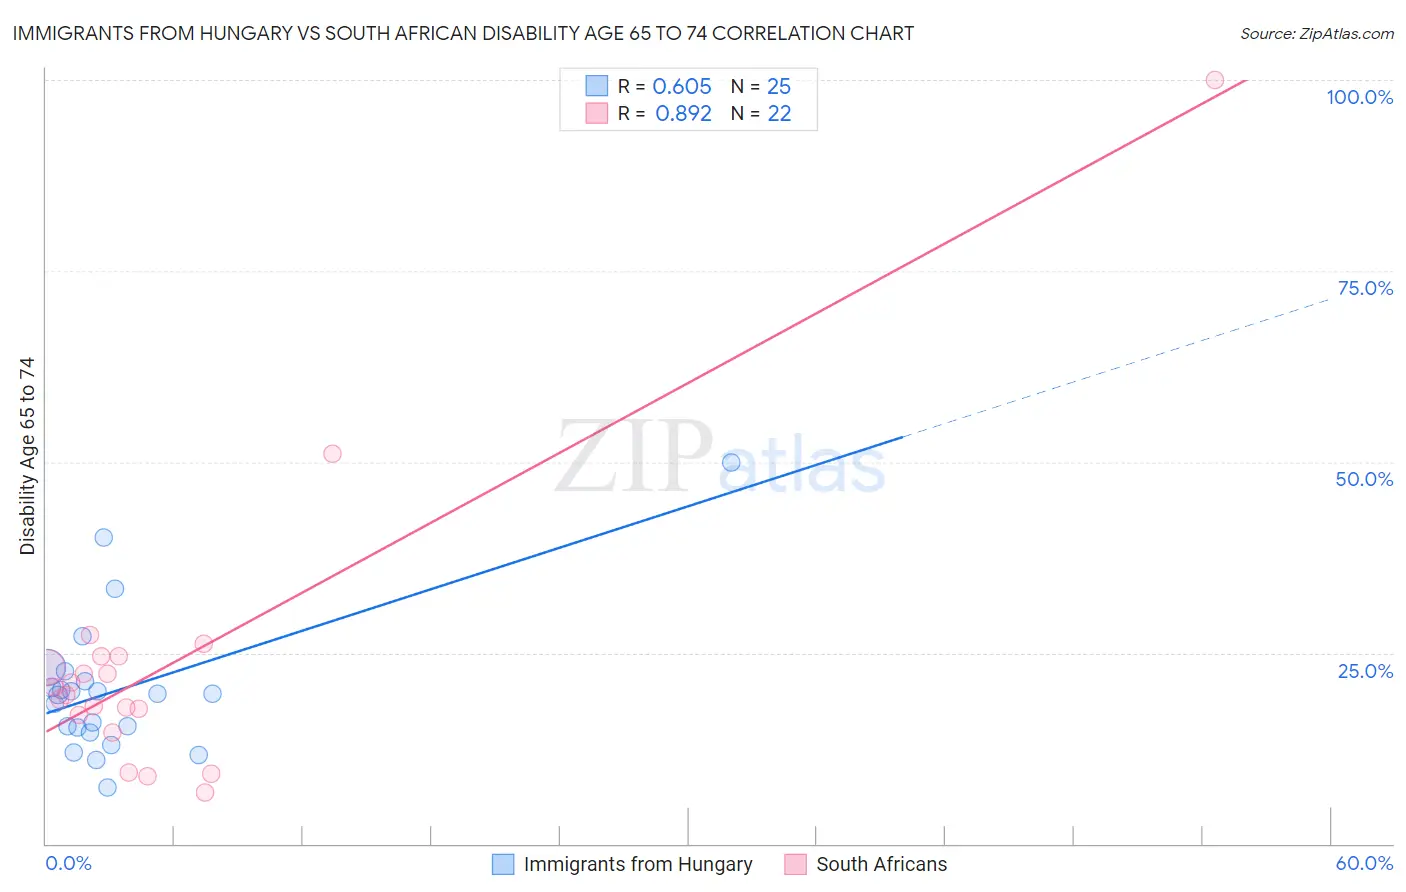 Immigrants from Hungary vs South African Disability Age 65 to 74